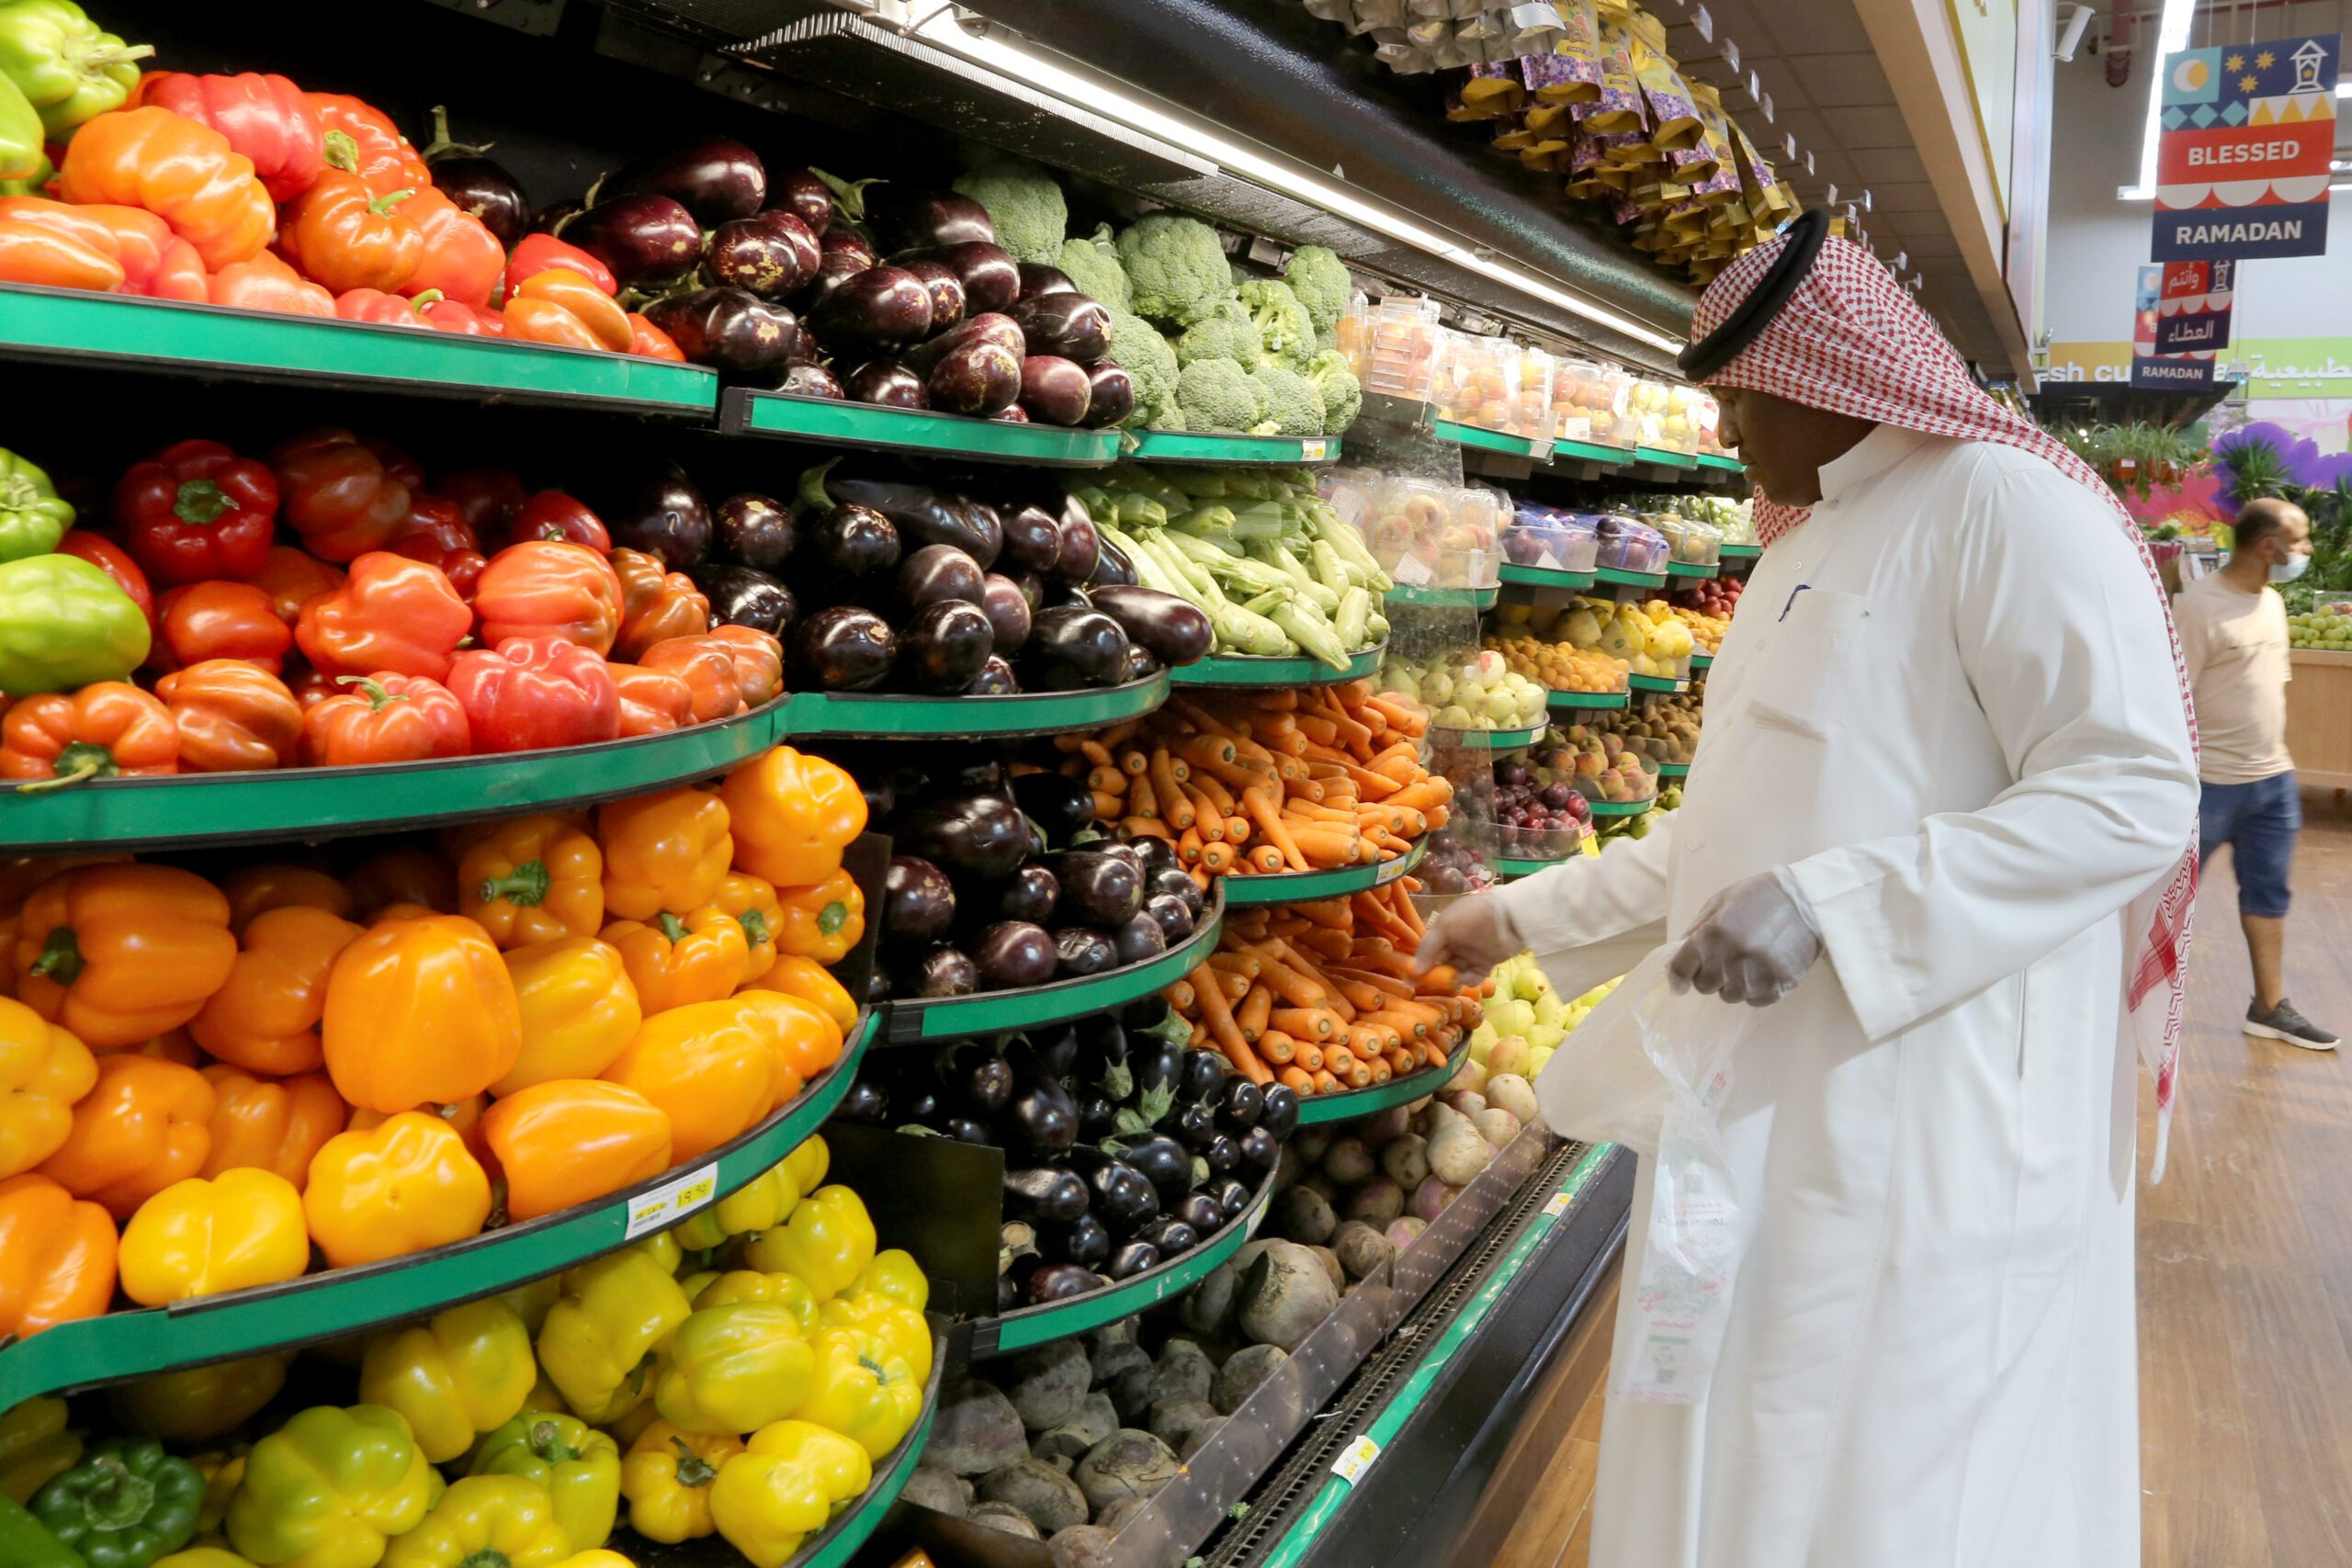 Food inflation across Mena countries rose by an average of 29% year-on-year